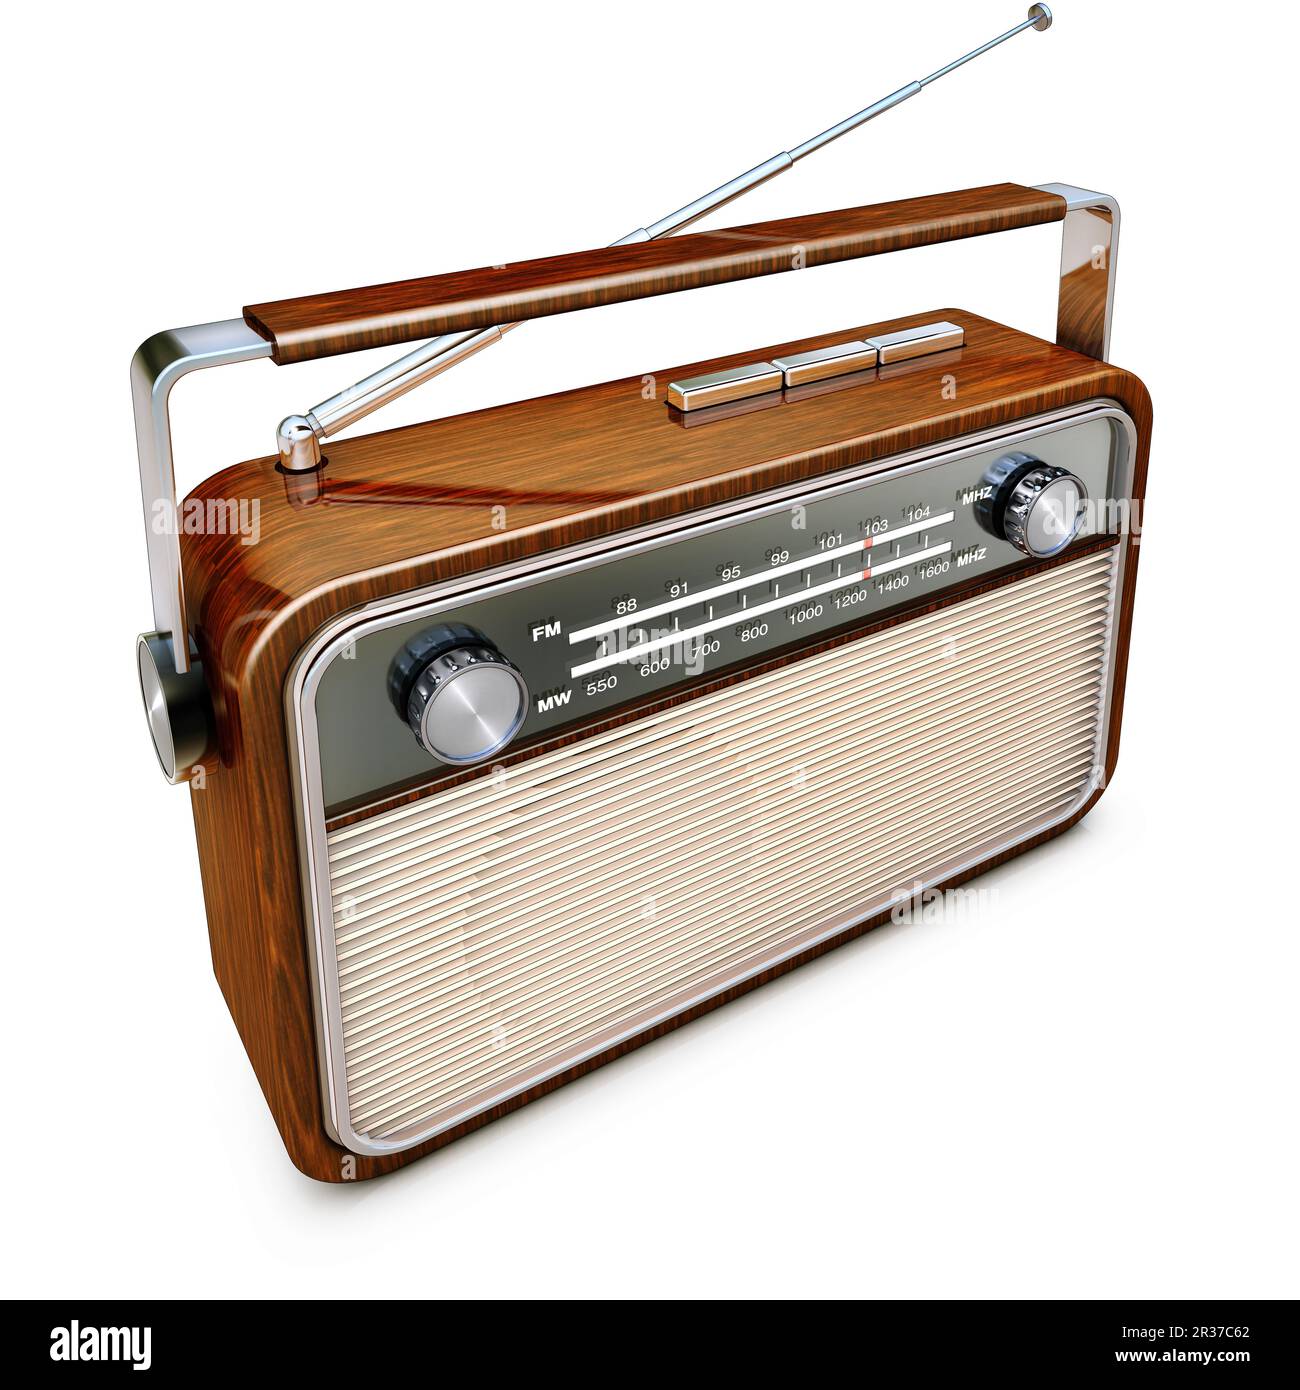 high resolution rendering of a vintage radio Stock Photo